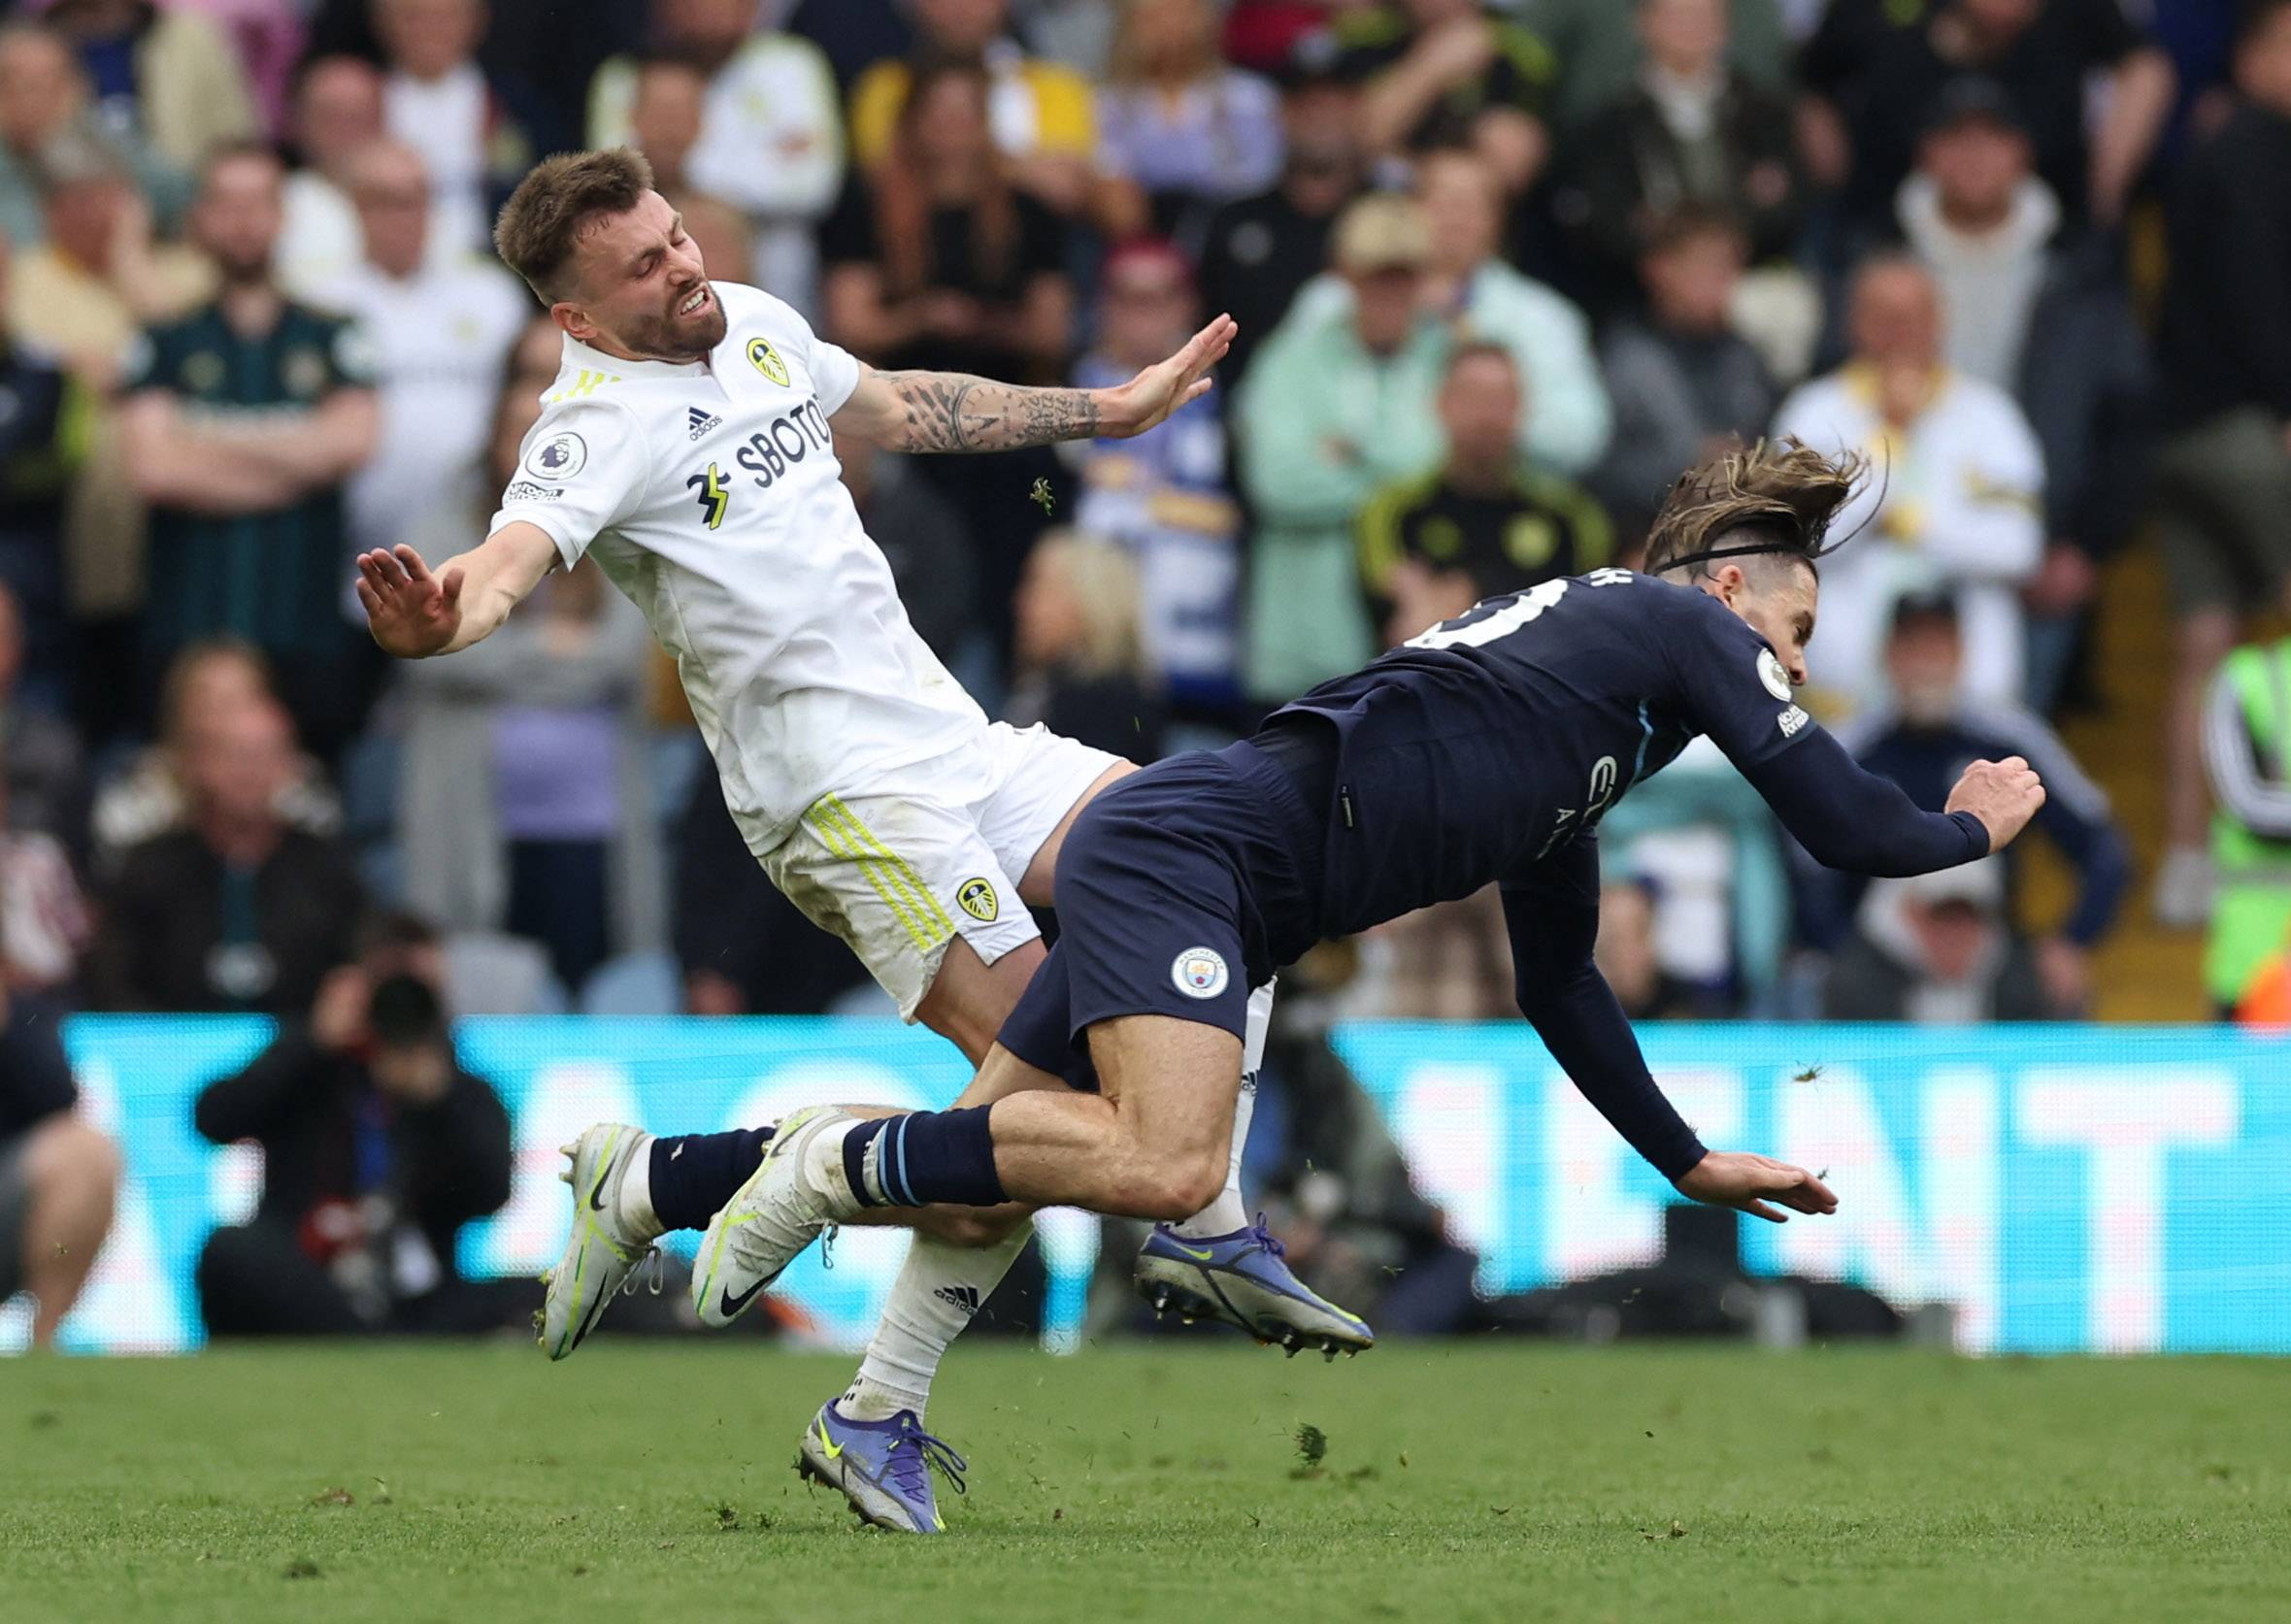 Leeds: Stuart Dallas could make return in early 2023 - Follow up